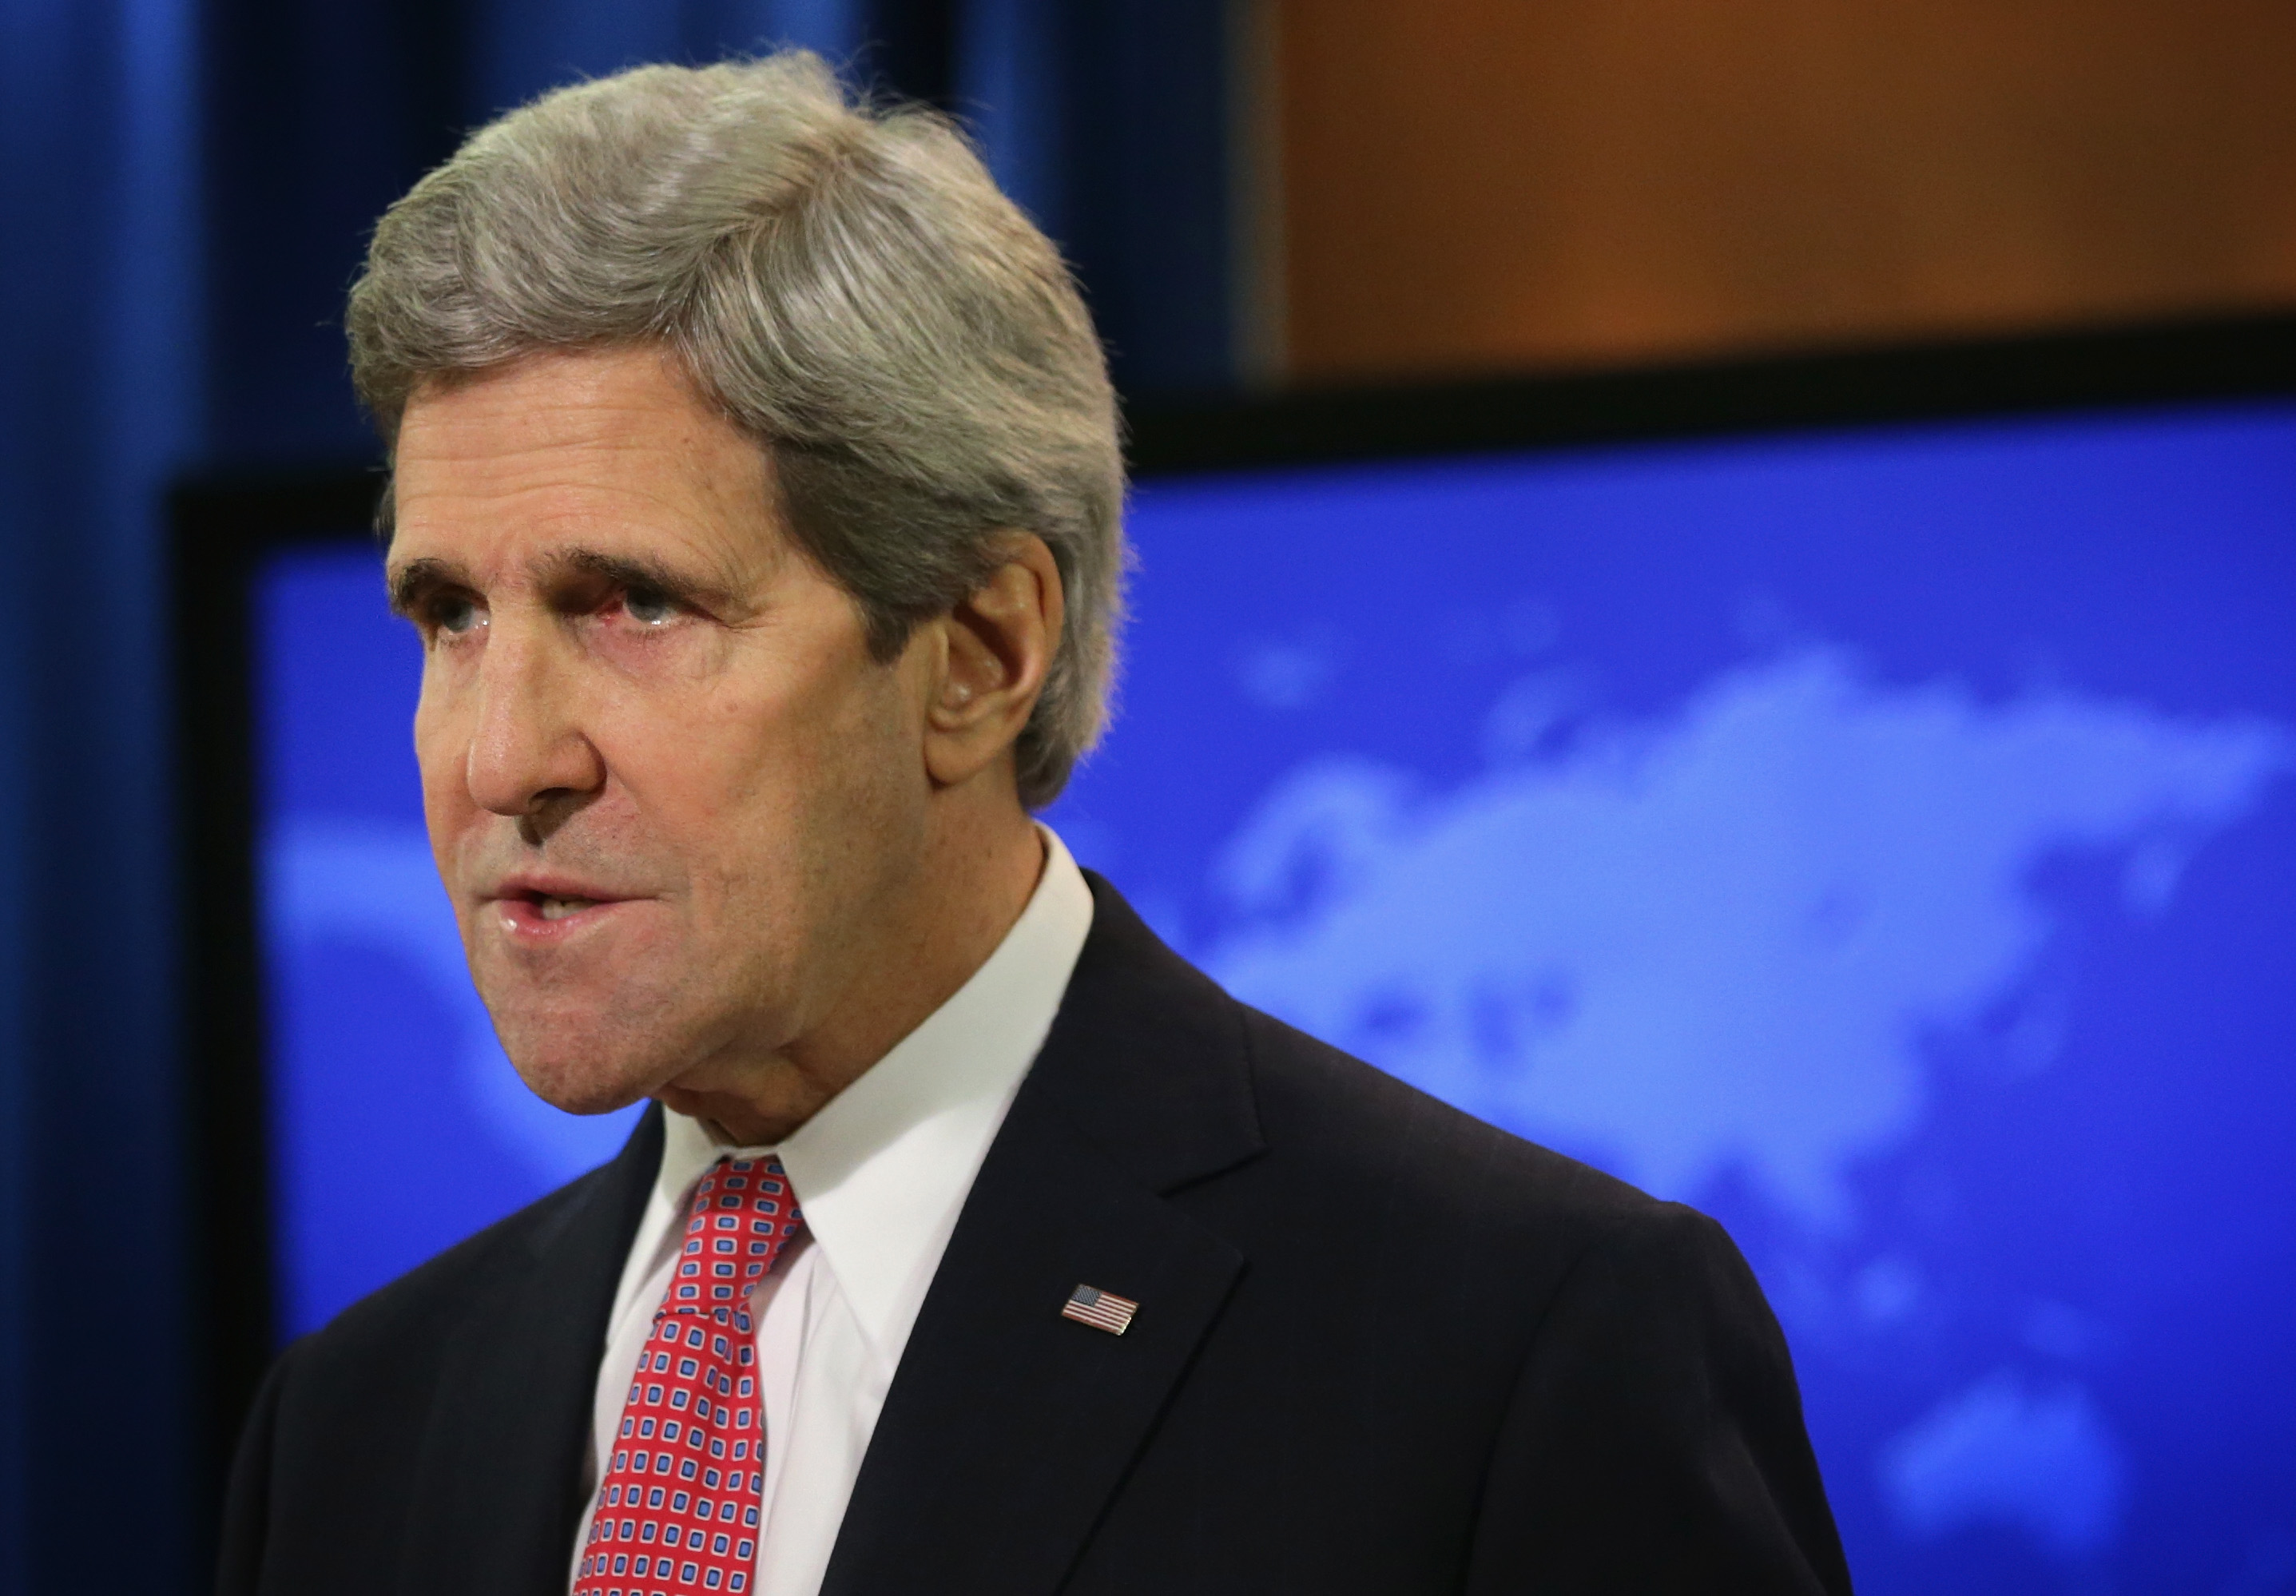 John Kerry to visit Kiev Tuesday in show of support for Ukrainian government